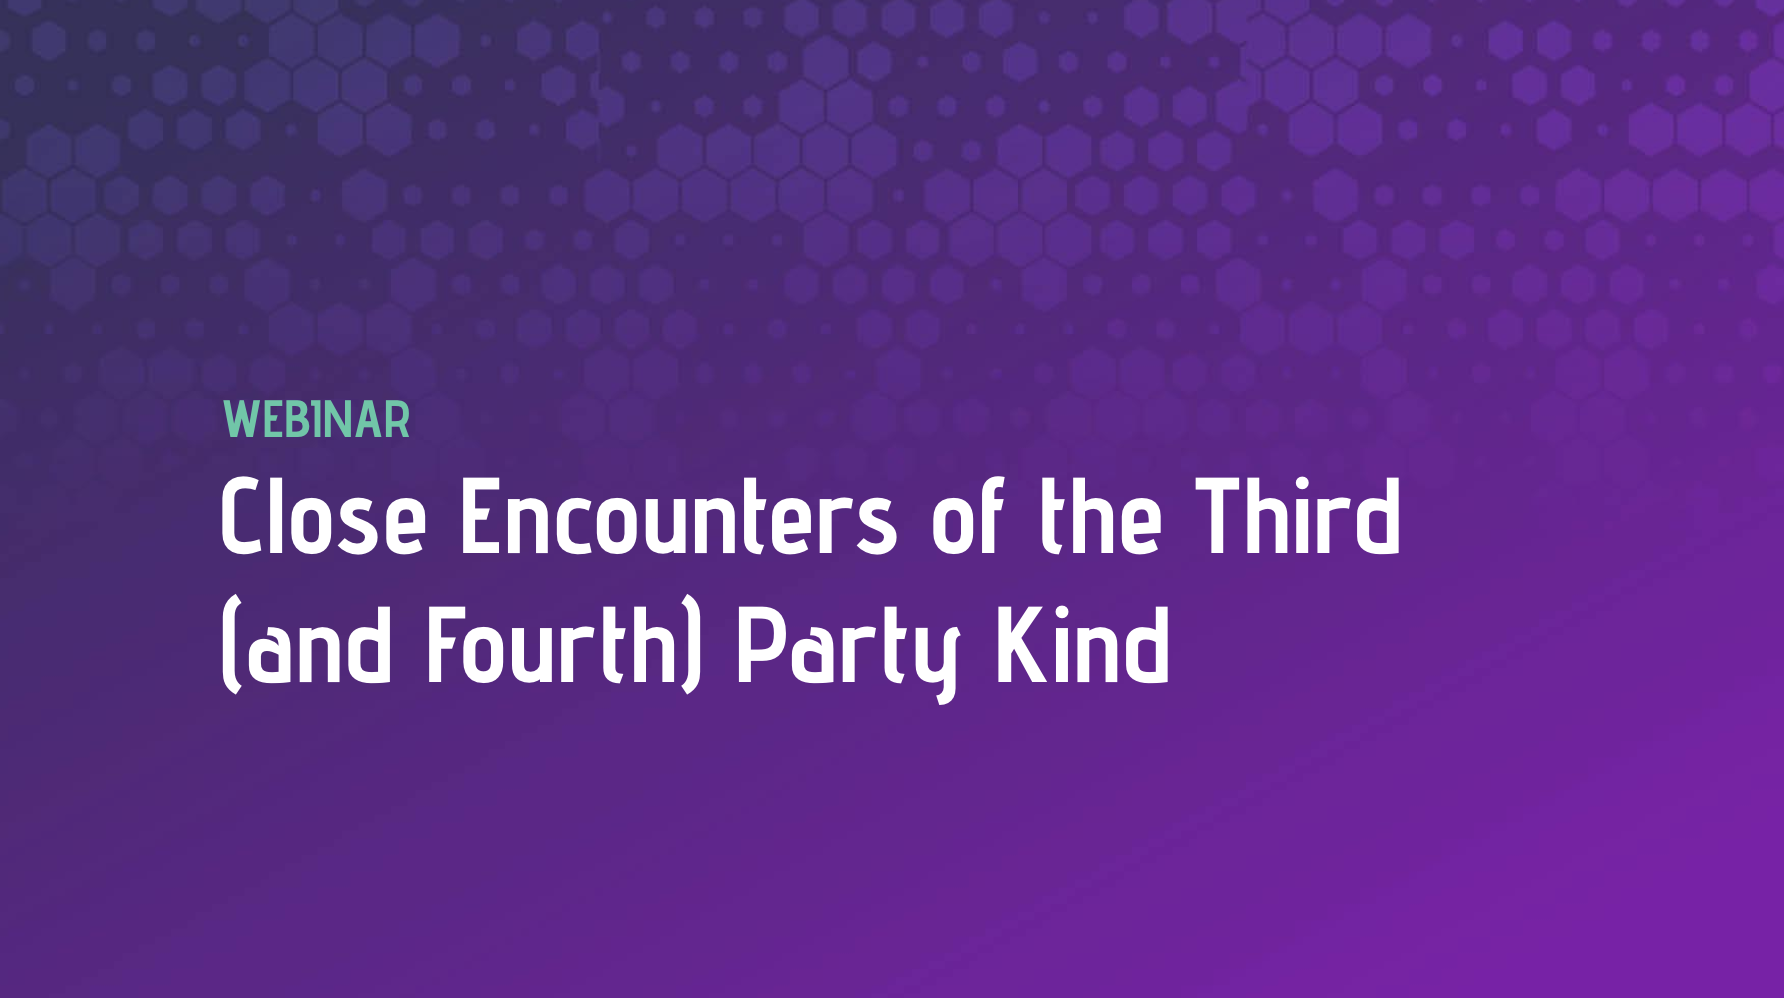 Close Encounters of the Third (and Fourth) Party Kind